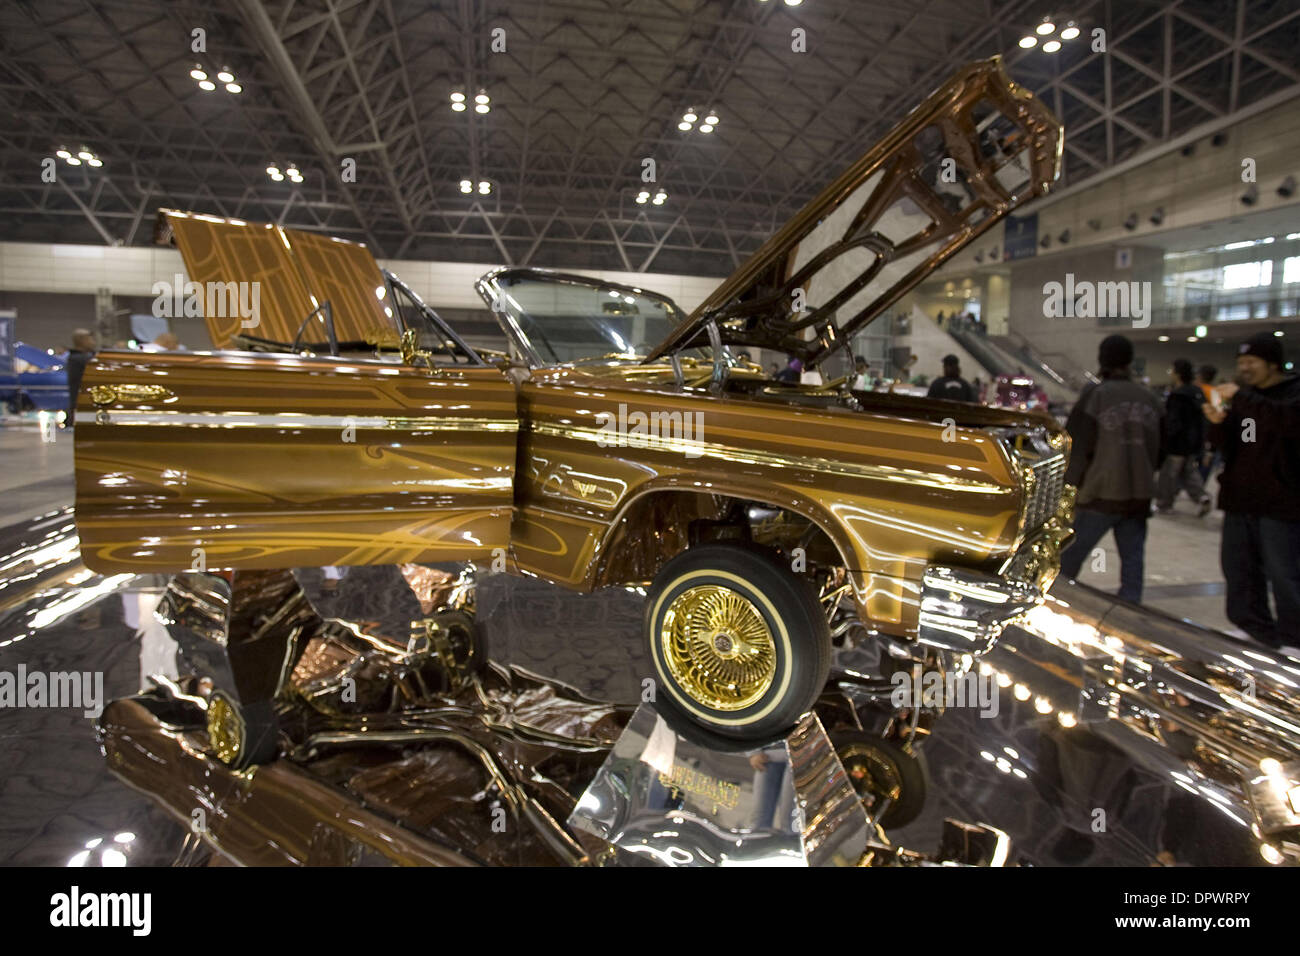 Nov 25, 2008 - Chiba, Japan - Customized classic cars showcasing the American lowrider culture are displayed at the Lowrider Japan Car Show which took place at Makuhari Messe Convention Center in Chiba, Japan. Pictured: A heavily modified Chevy Impala with gold trimmings. (Credit Image: © Christopher Jue/ZUMA Press) Stock Photo